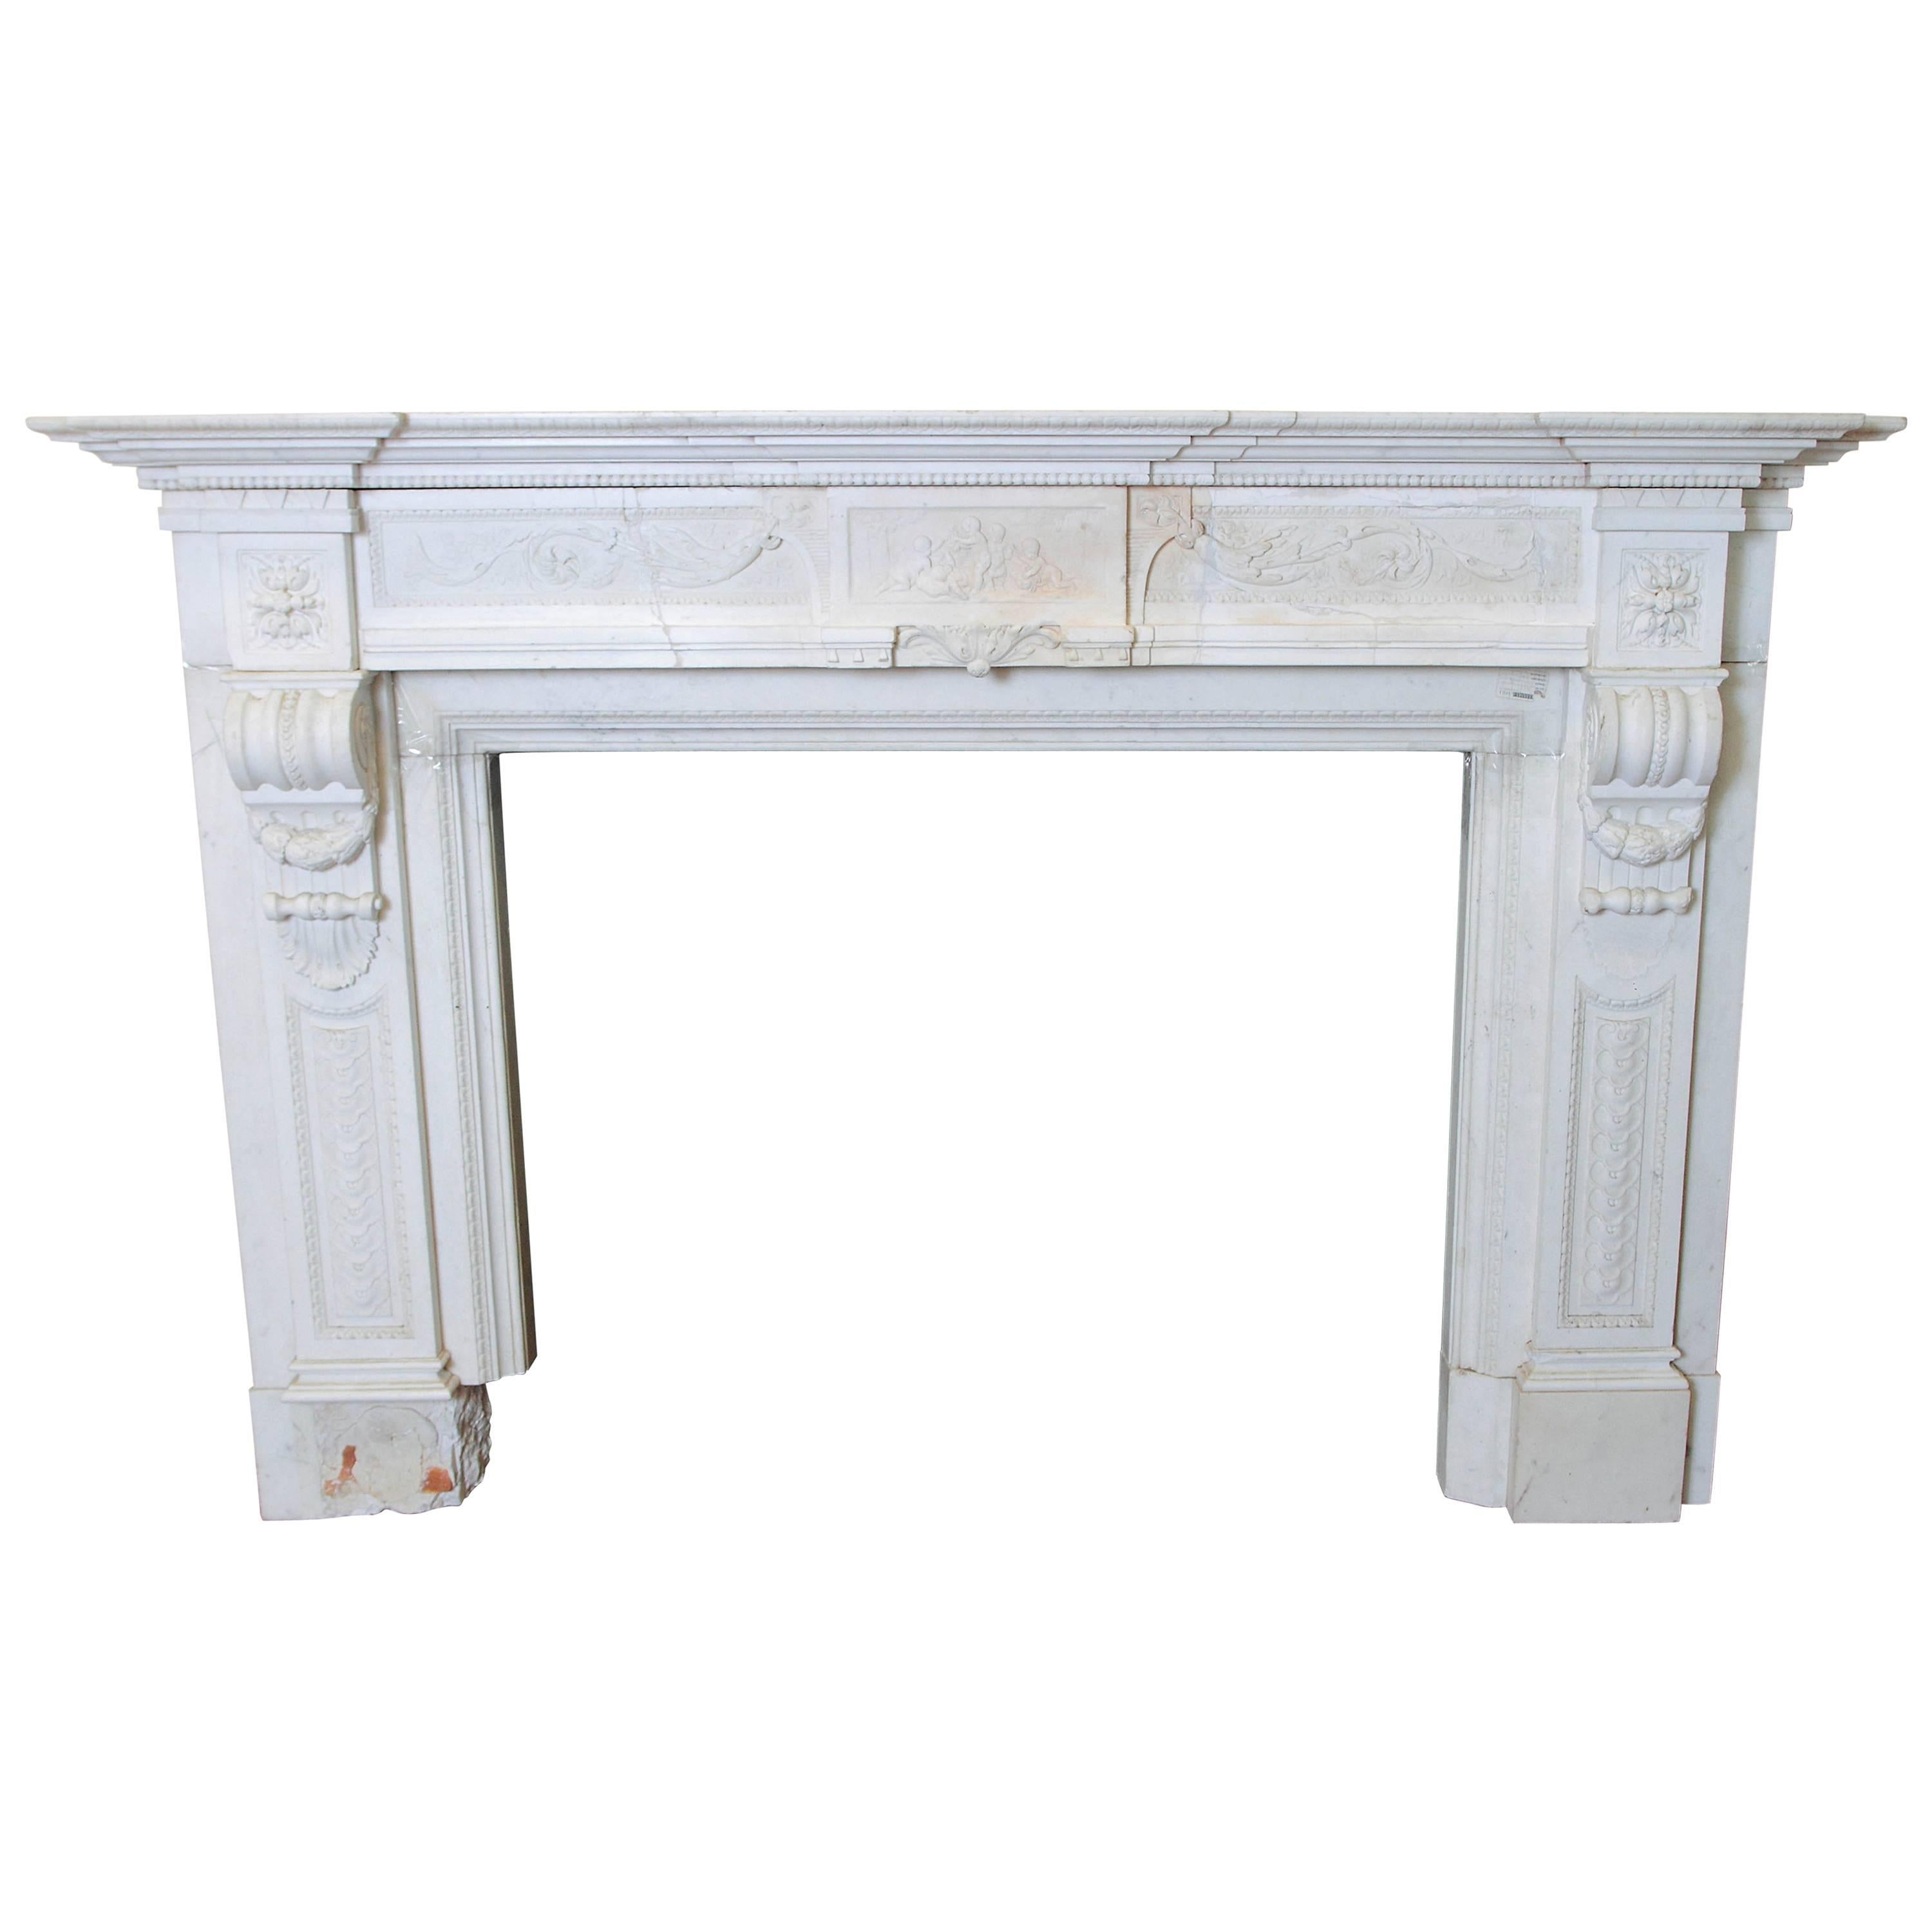 Late 18th Century Louis XVI Style Mantel For Sale